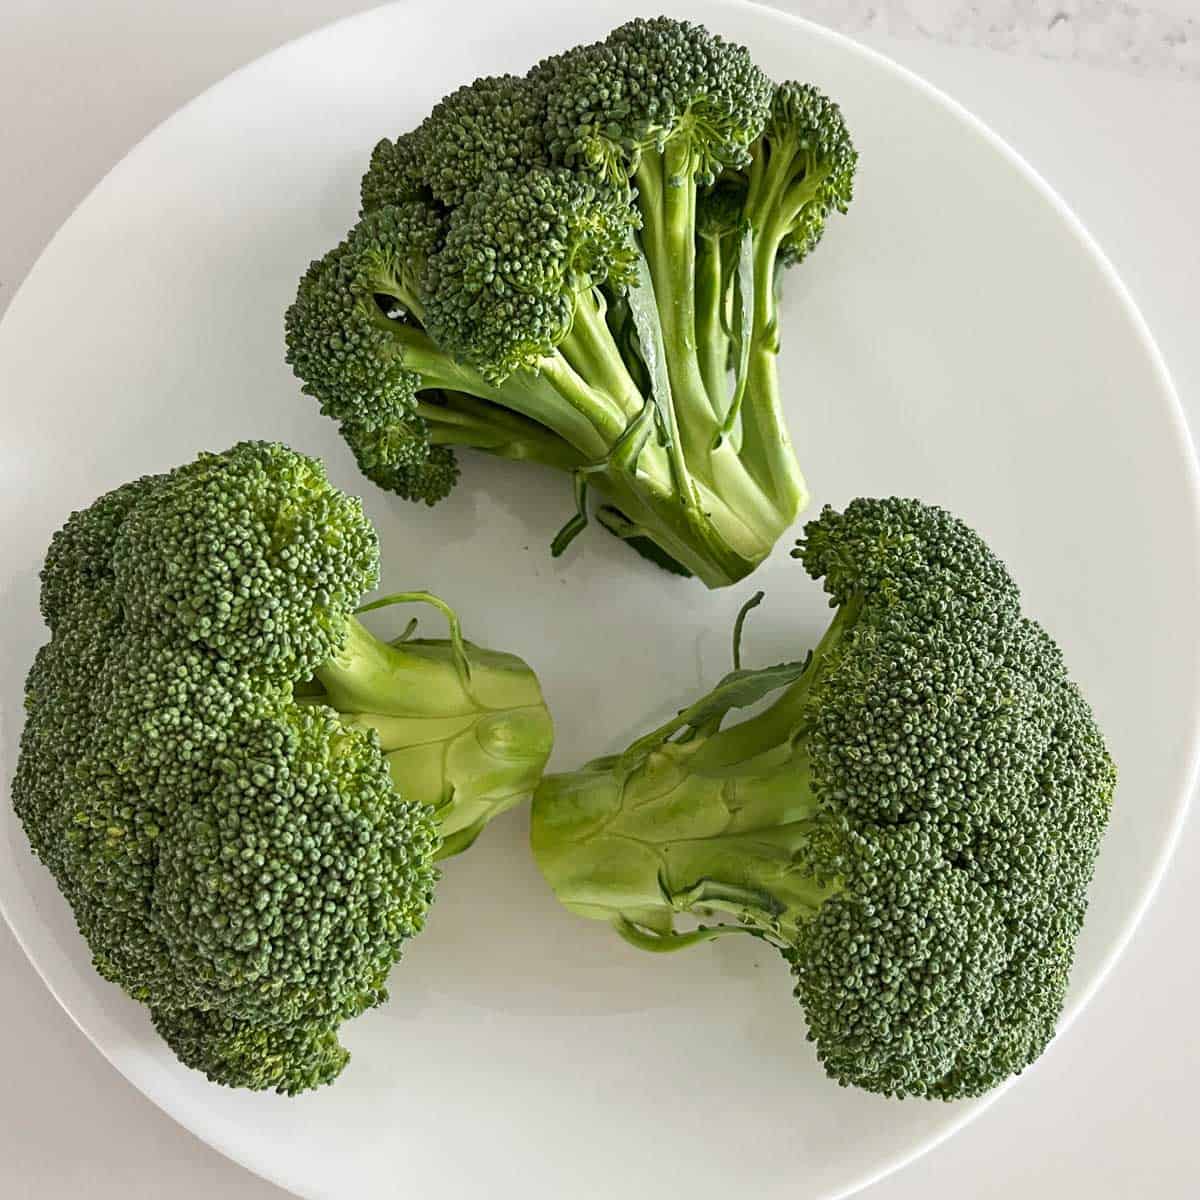 Broccoli crowns on a plate.